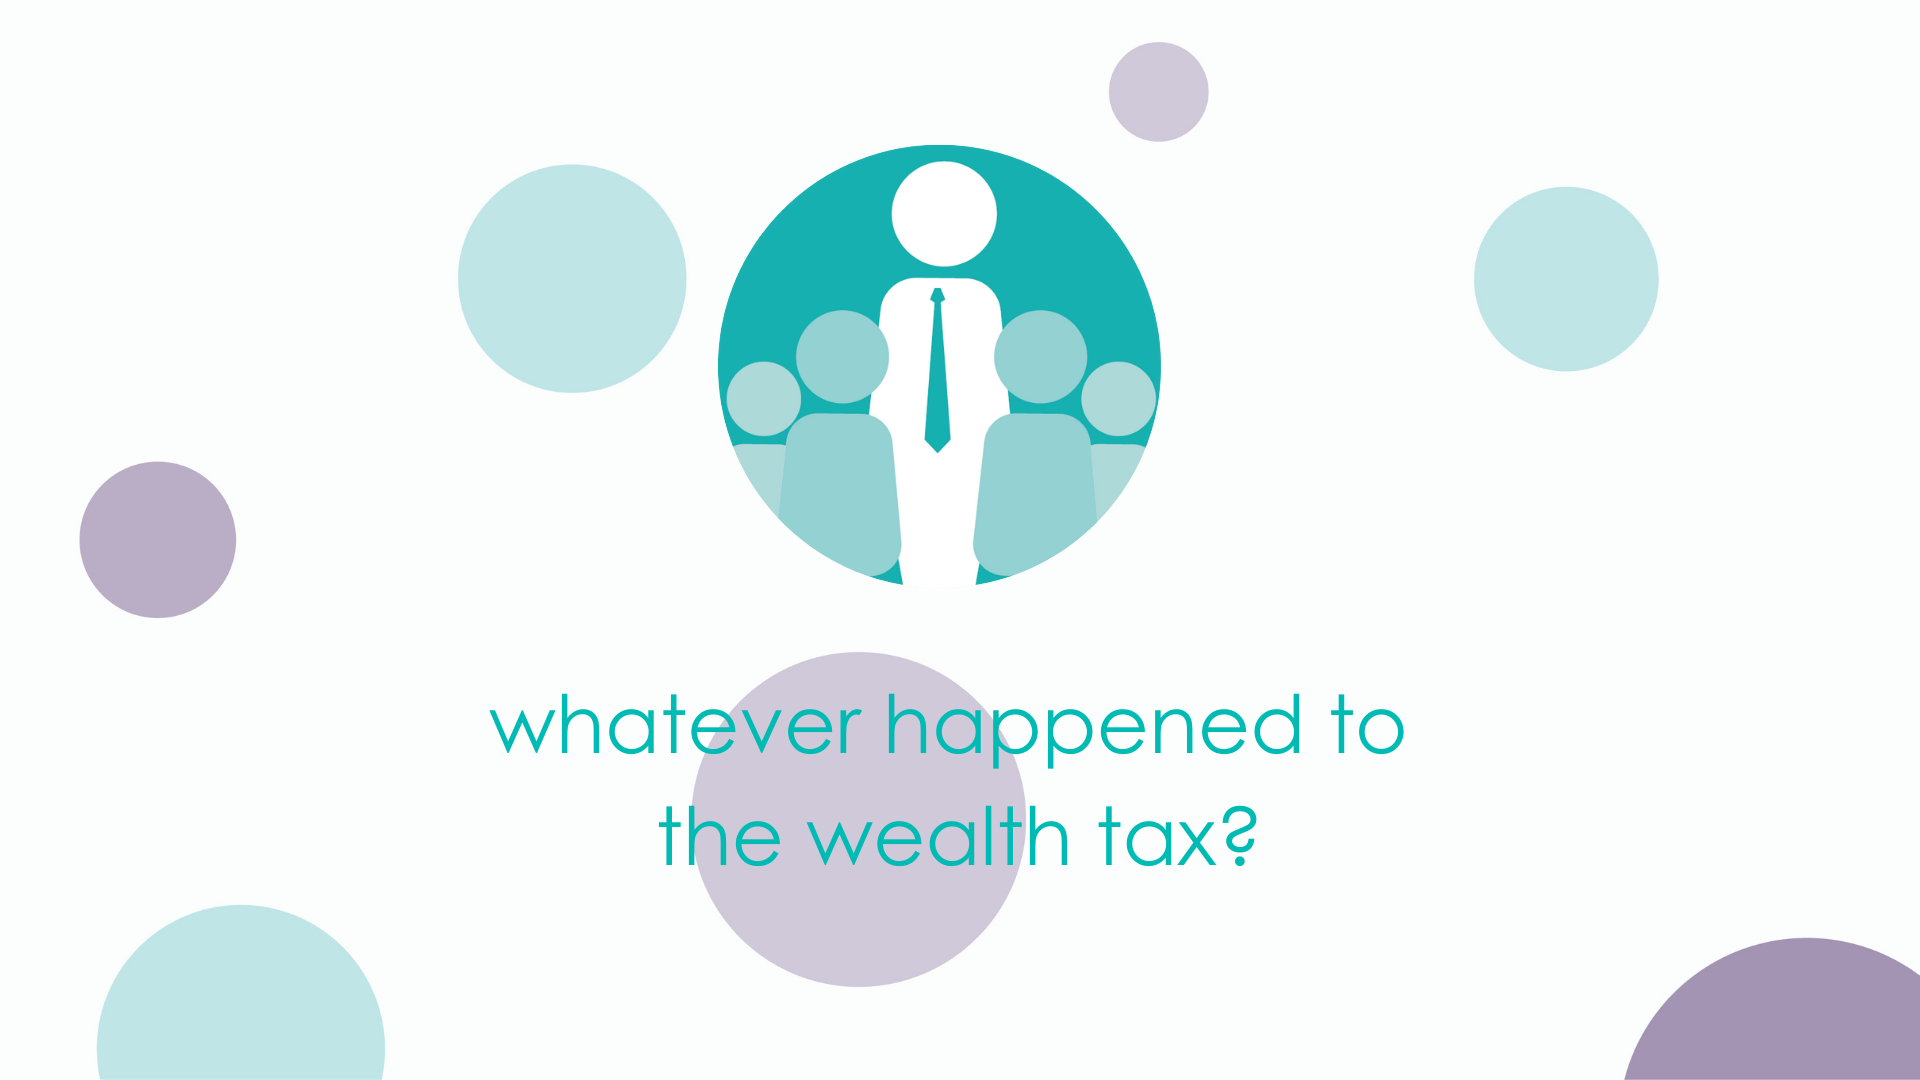 Whatever happened to the wealth tax?